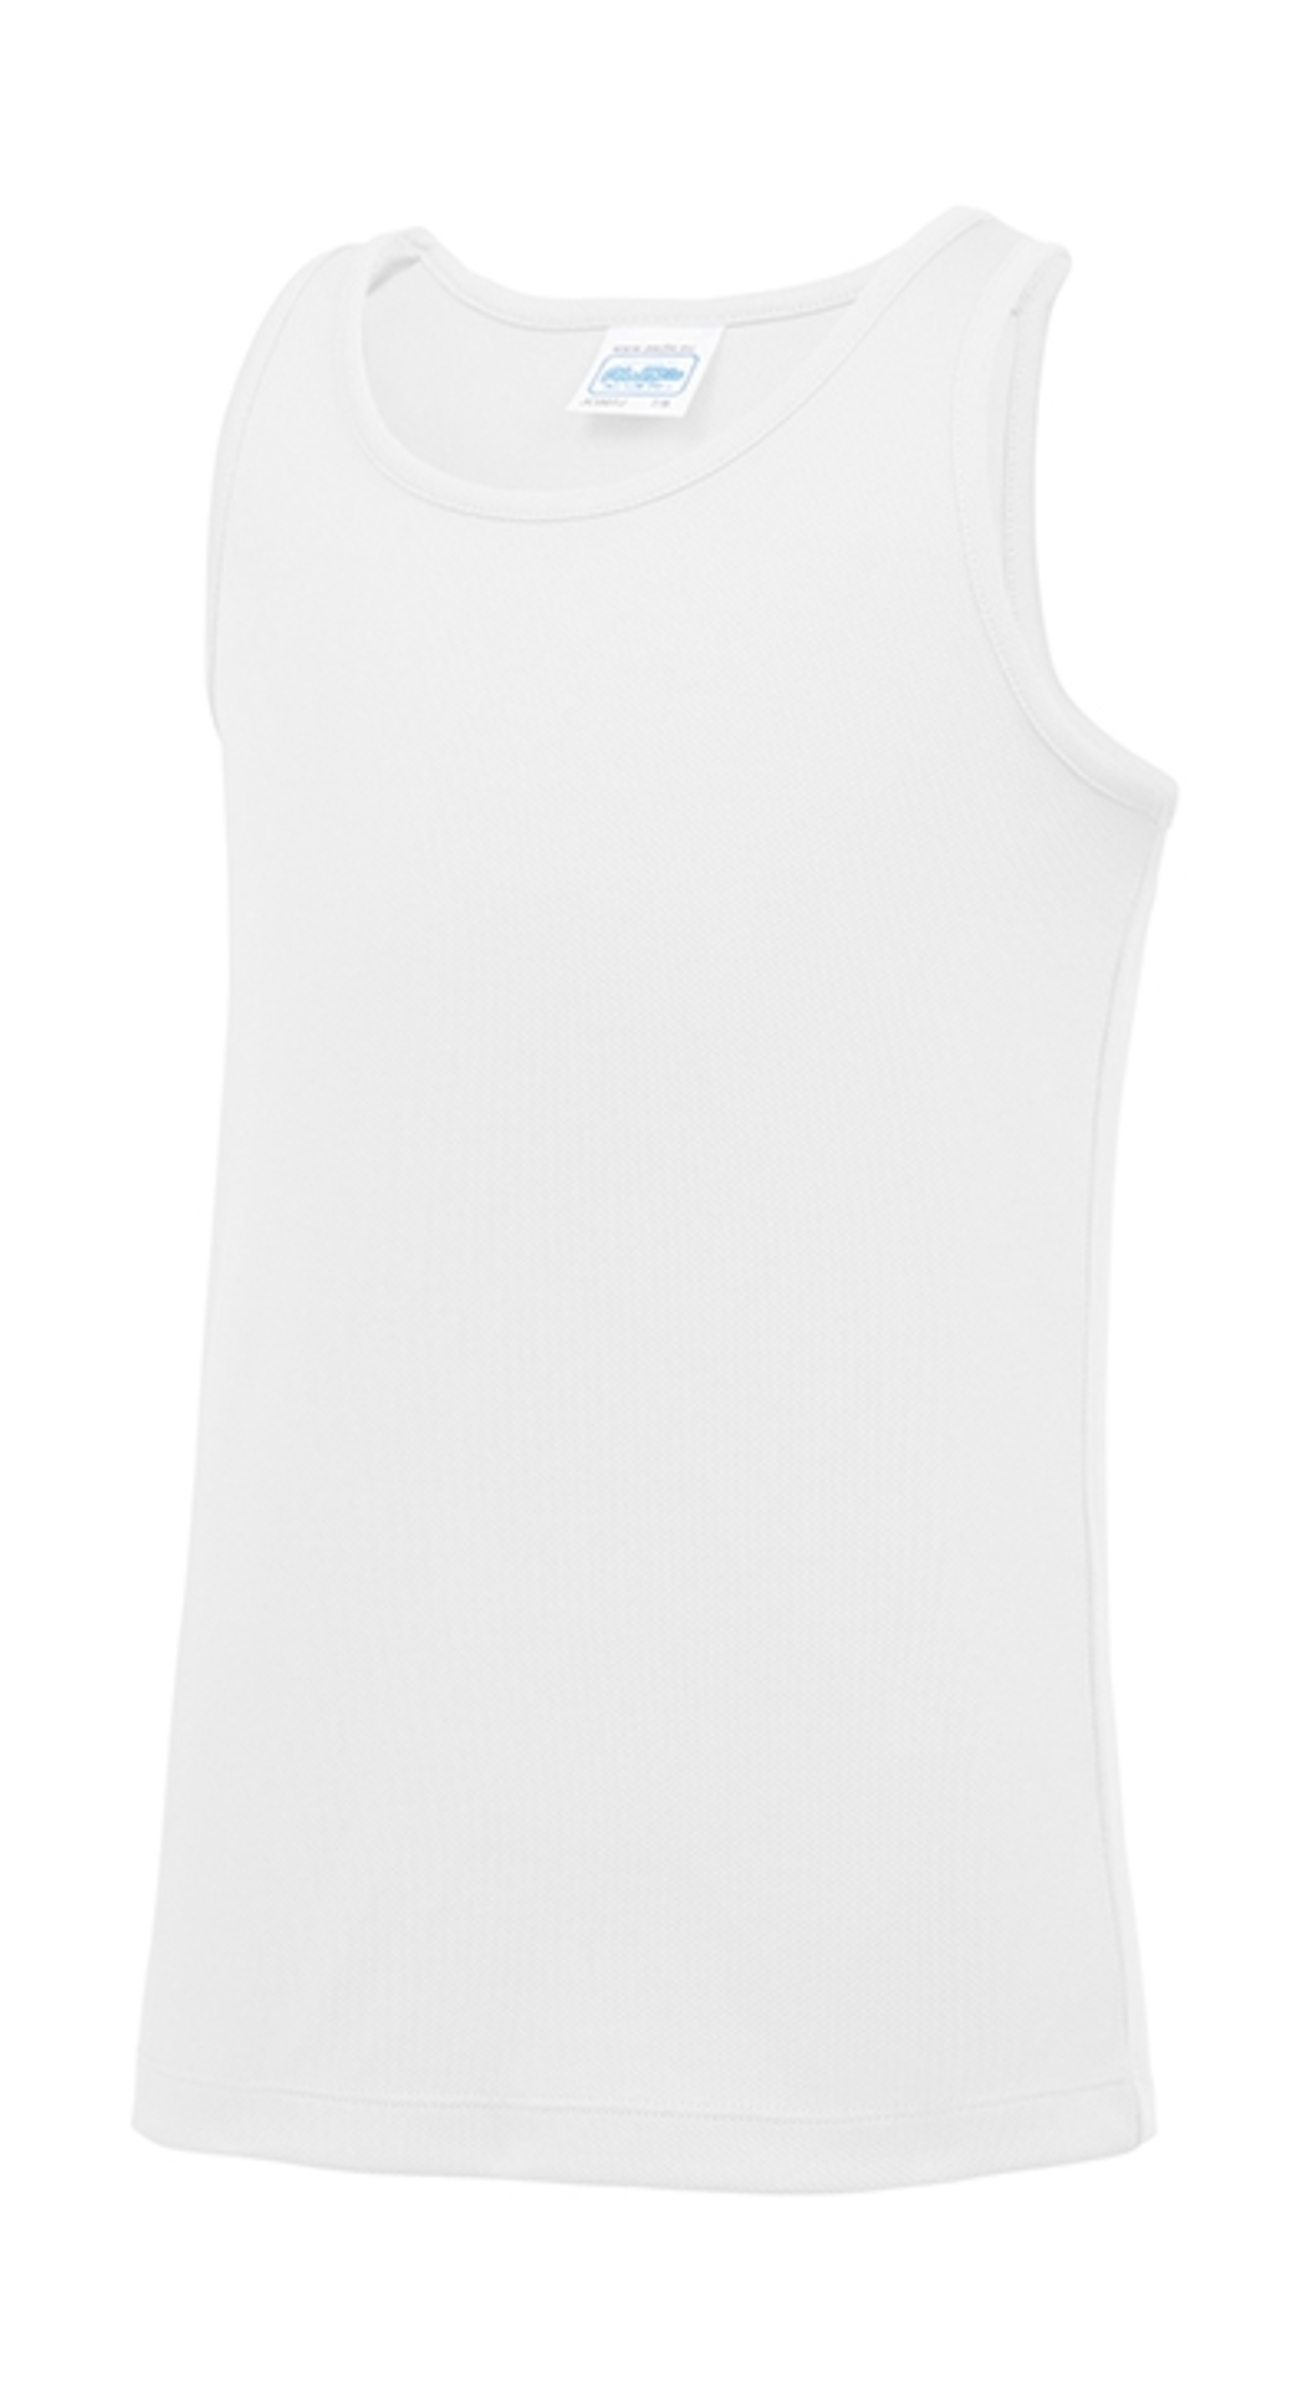 Just Cool Kids Cool Vest - Artic White - 7-8 Yrs